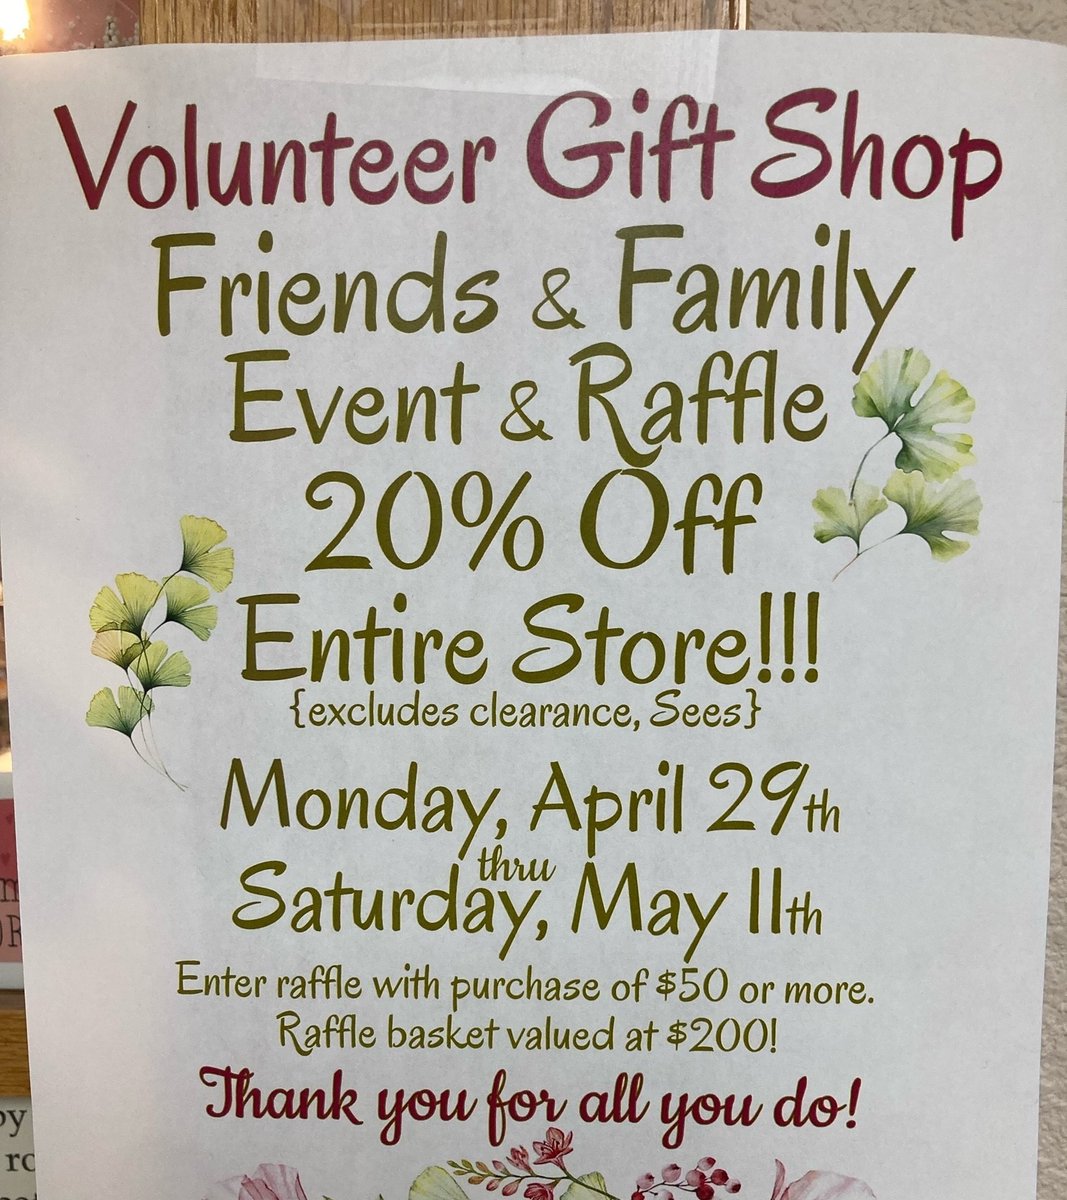 🎉Join us at the Mad River Community Hospital Volunteer Gift Shop for an exciting event and raffle! 🎁 Shop for unique gifts while supporting a great cause. 
#GiveBack #ShopForACause #VolunteerGiftShop